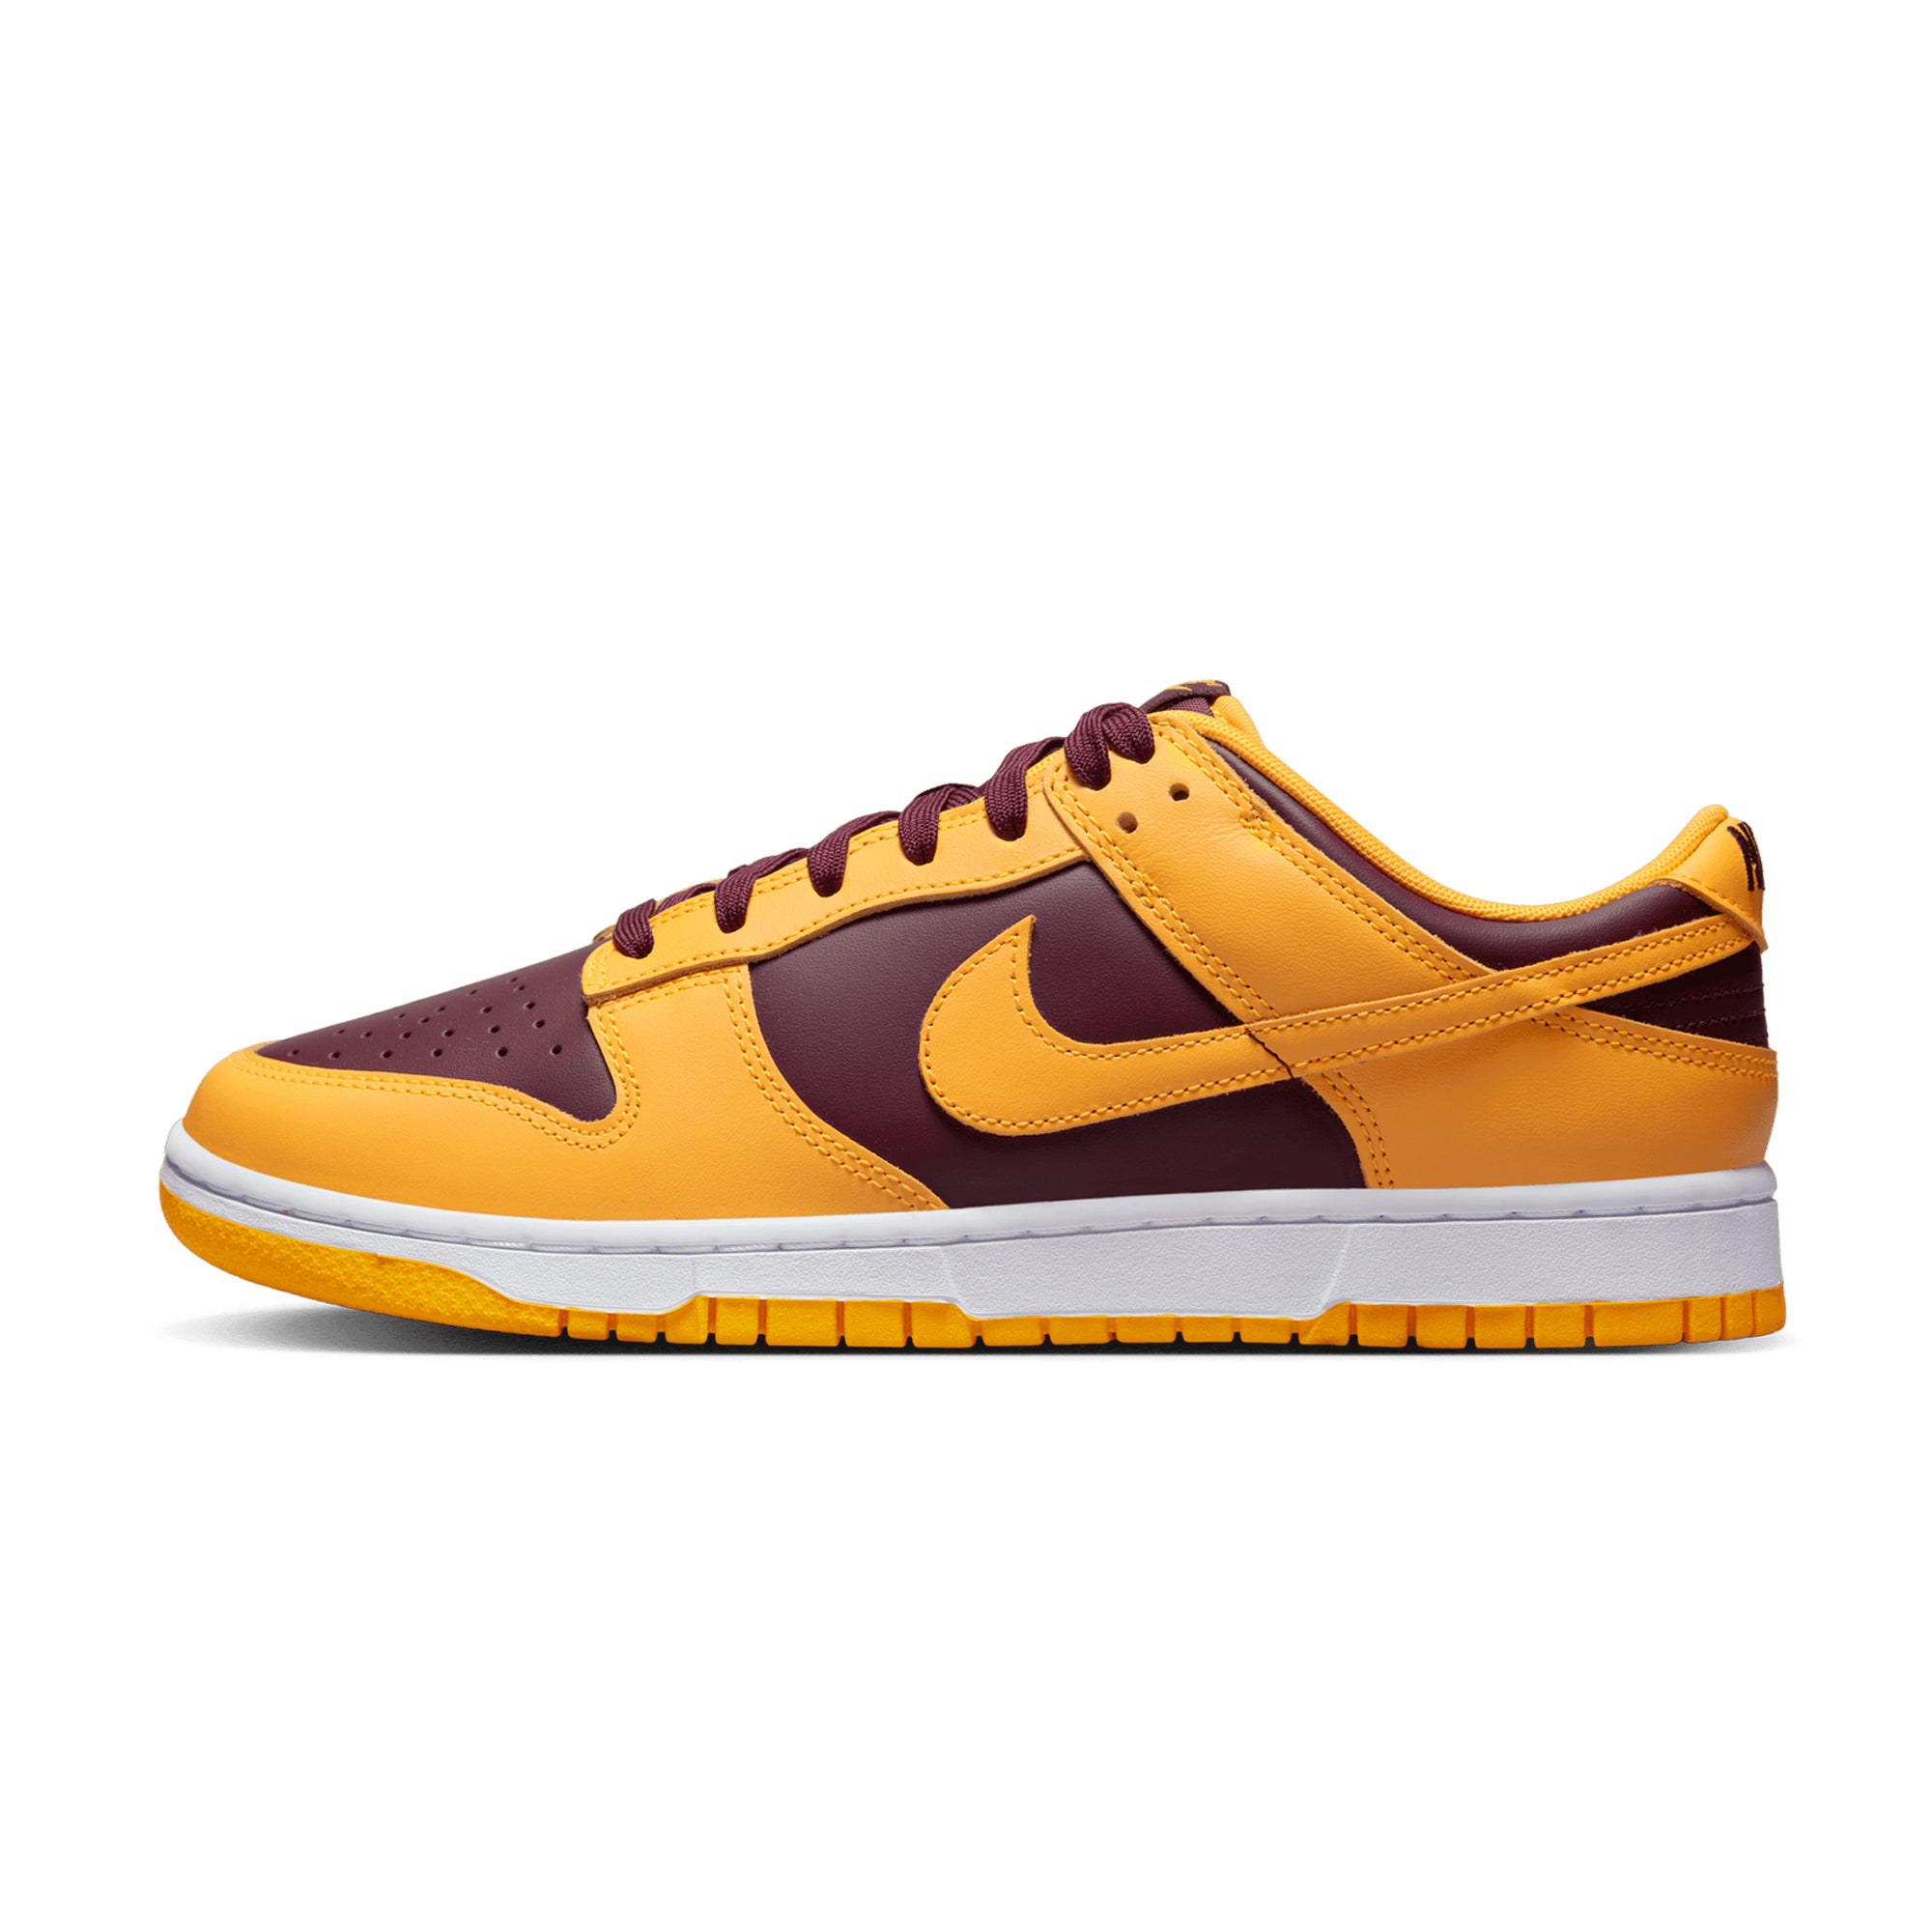 nike air force 1 low ebay price guide